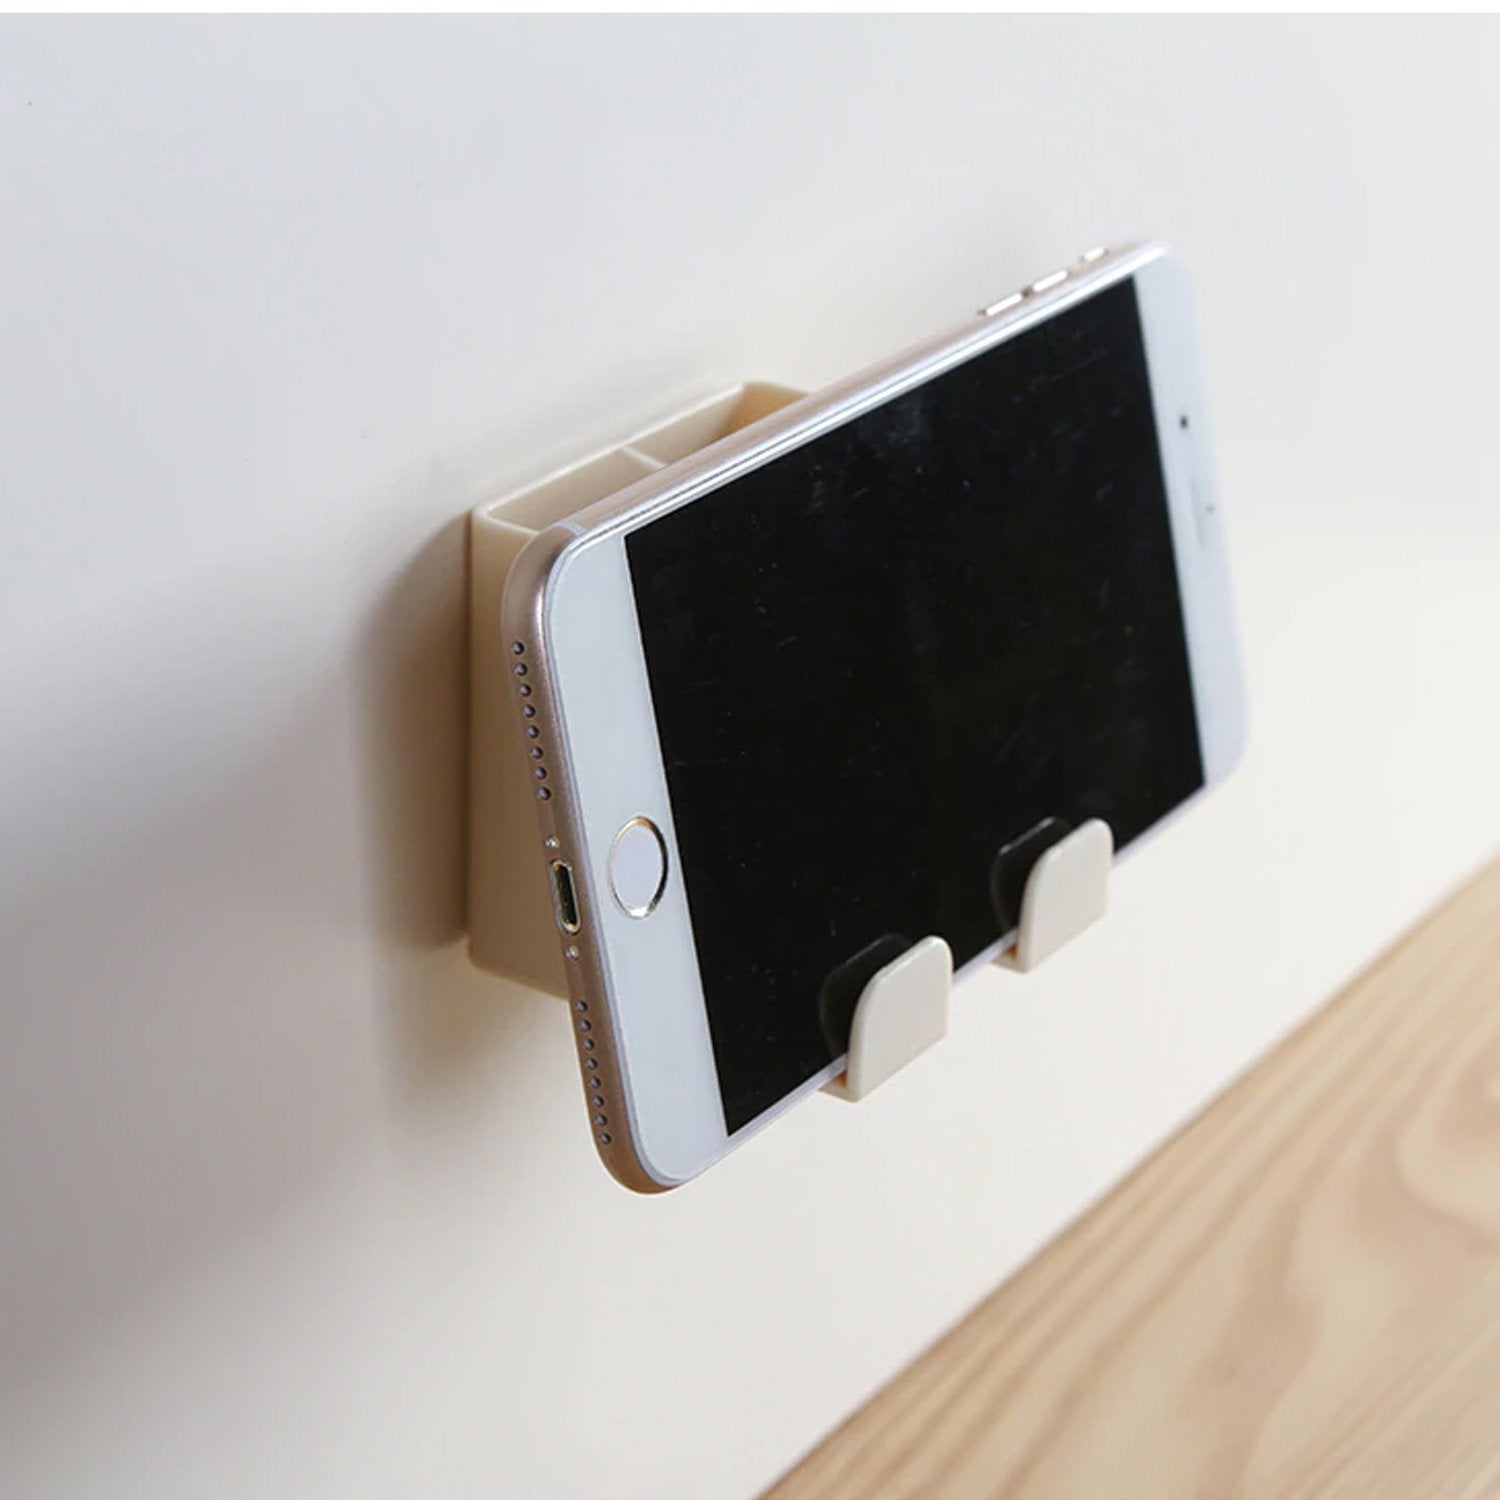 1146 Air Conditioner Remote Mobile Phone Wall Mount Storage Holder (Multicolour) - SkyShopy